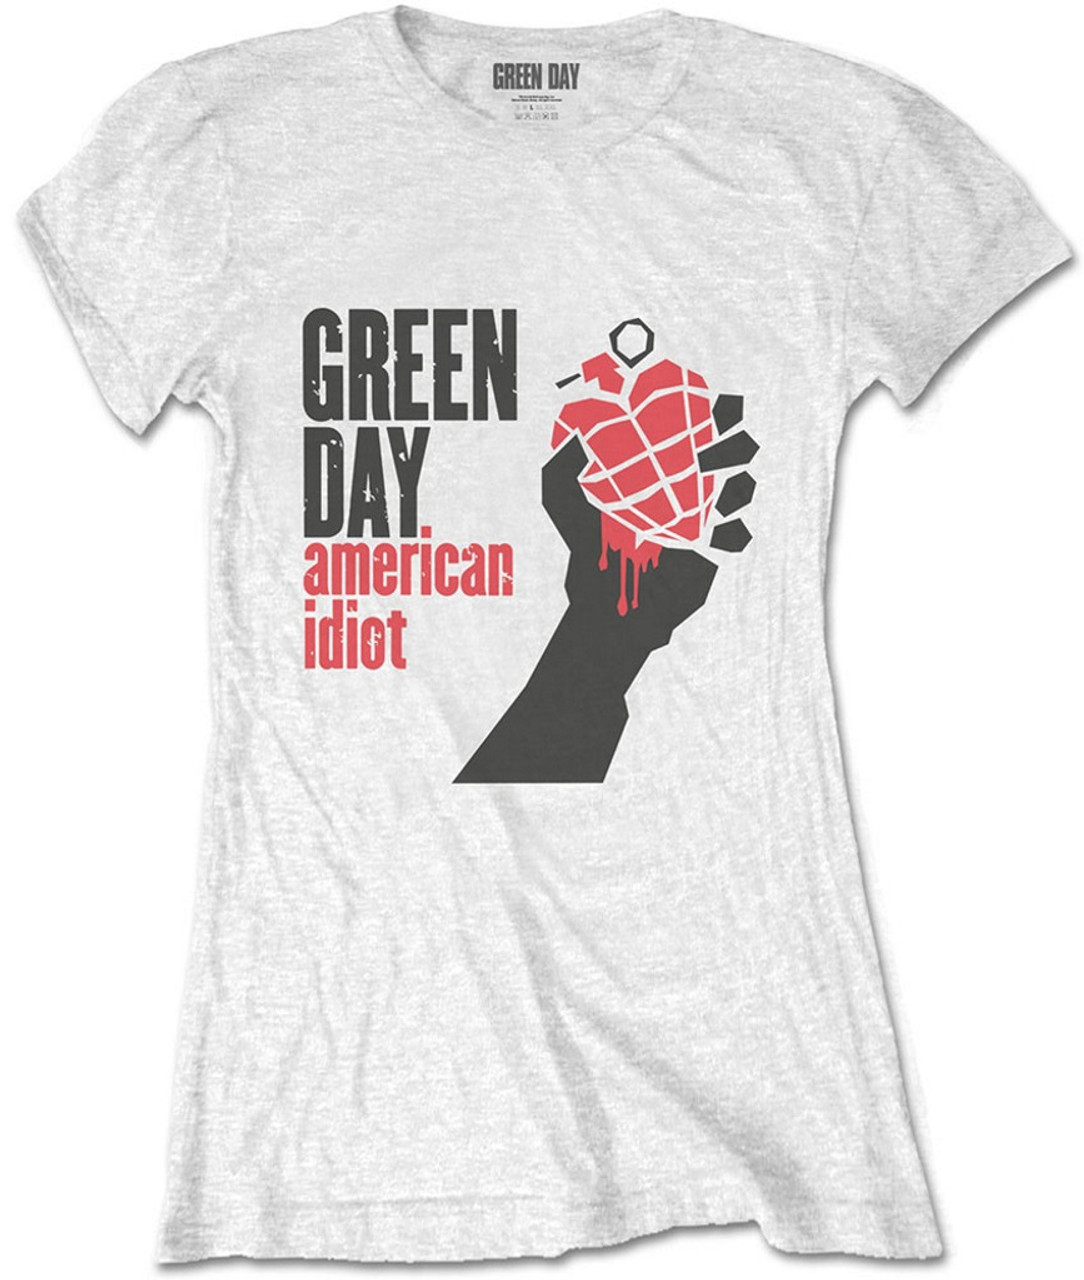 Green Day 'American Idiot' (White) Womens Fitted T-Shirt